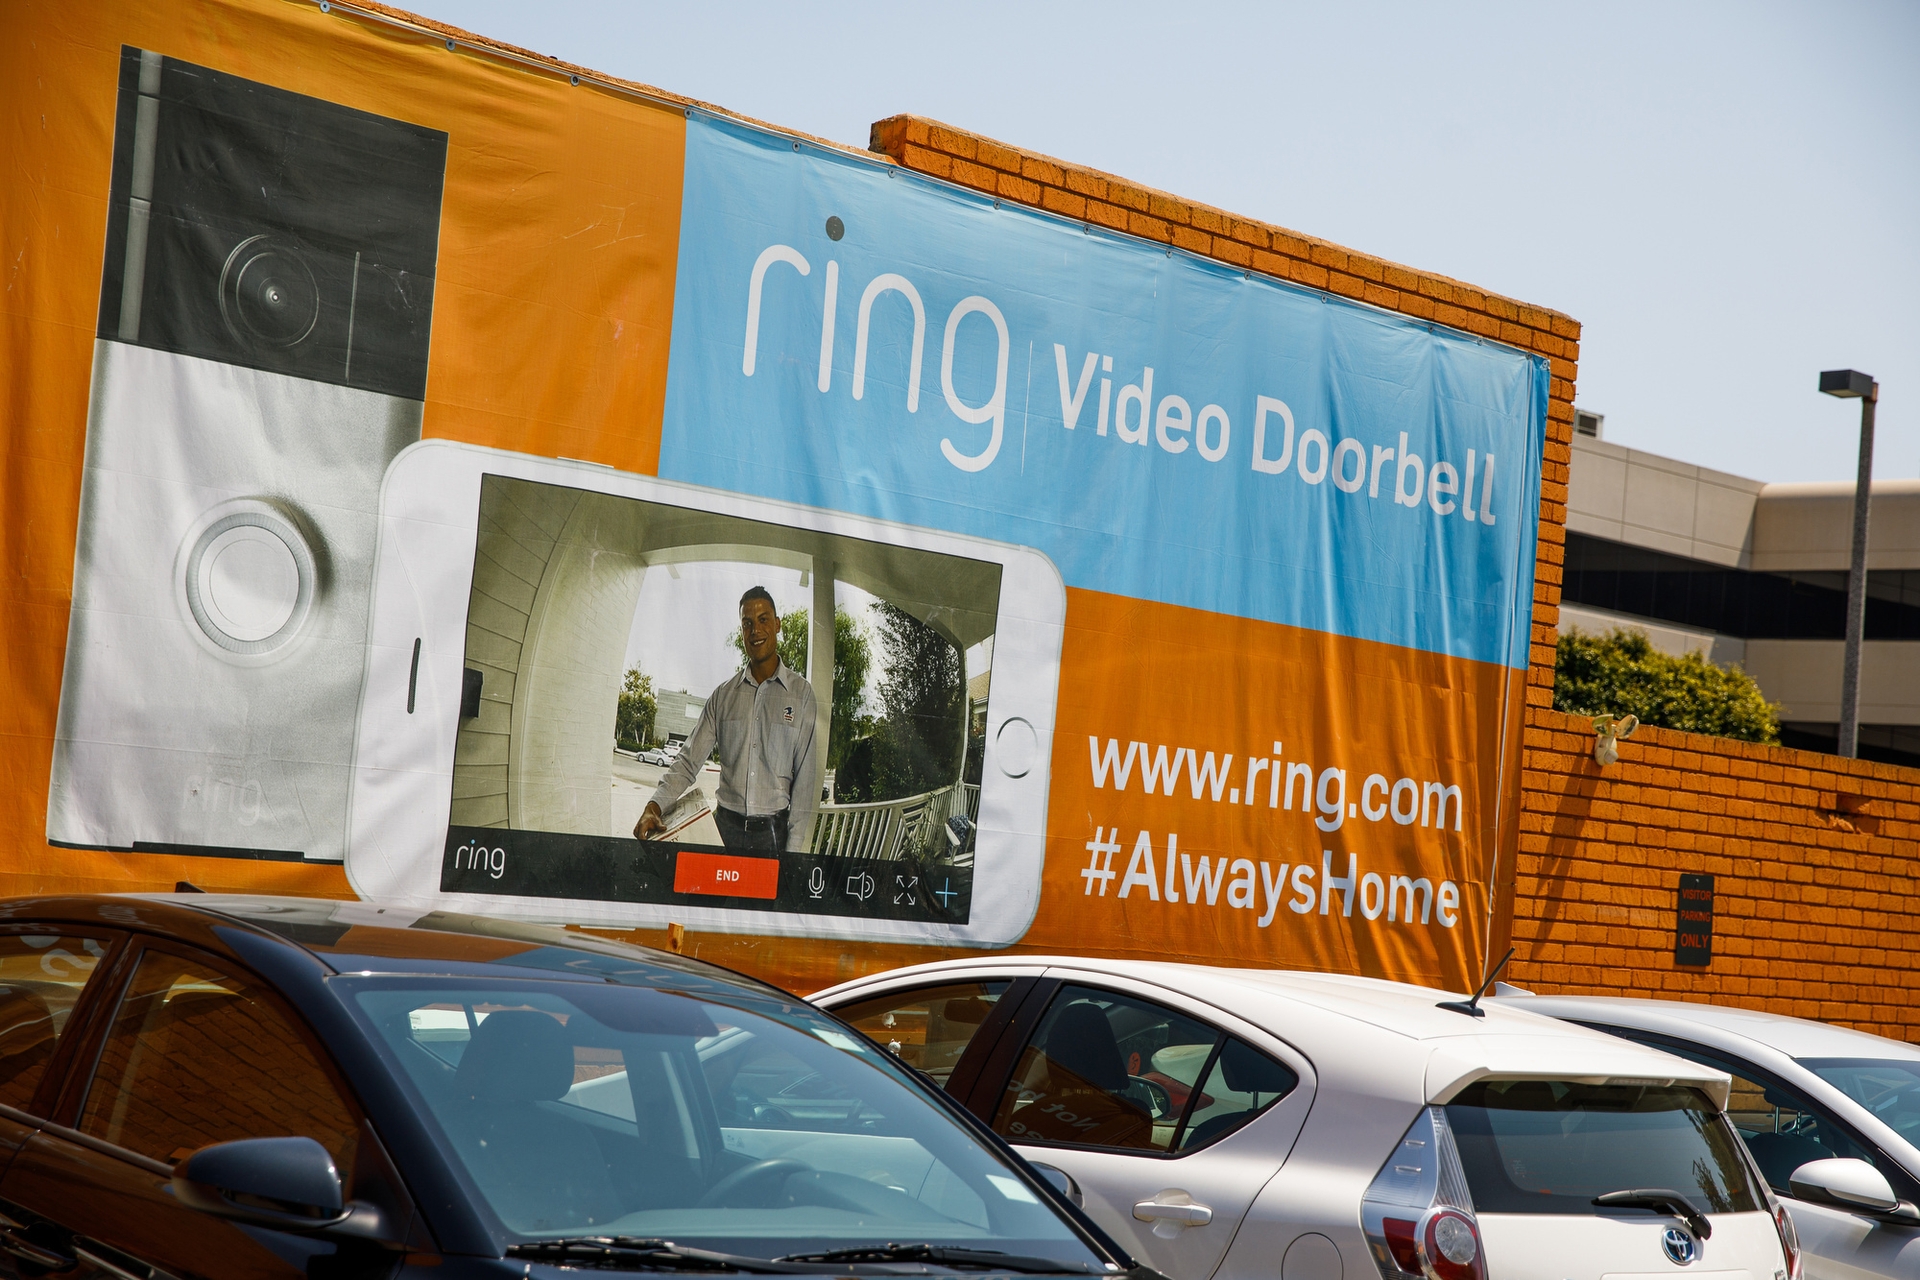 A banner with a screen capture of the Ring video doorbell, with the Ring URL (www.ring.com) and the hashtag #AlwaysHome